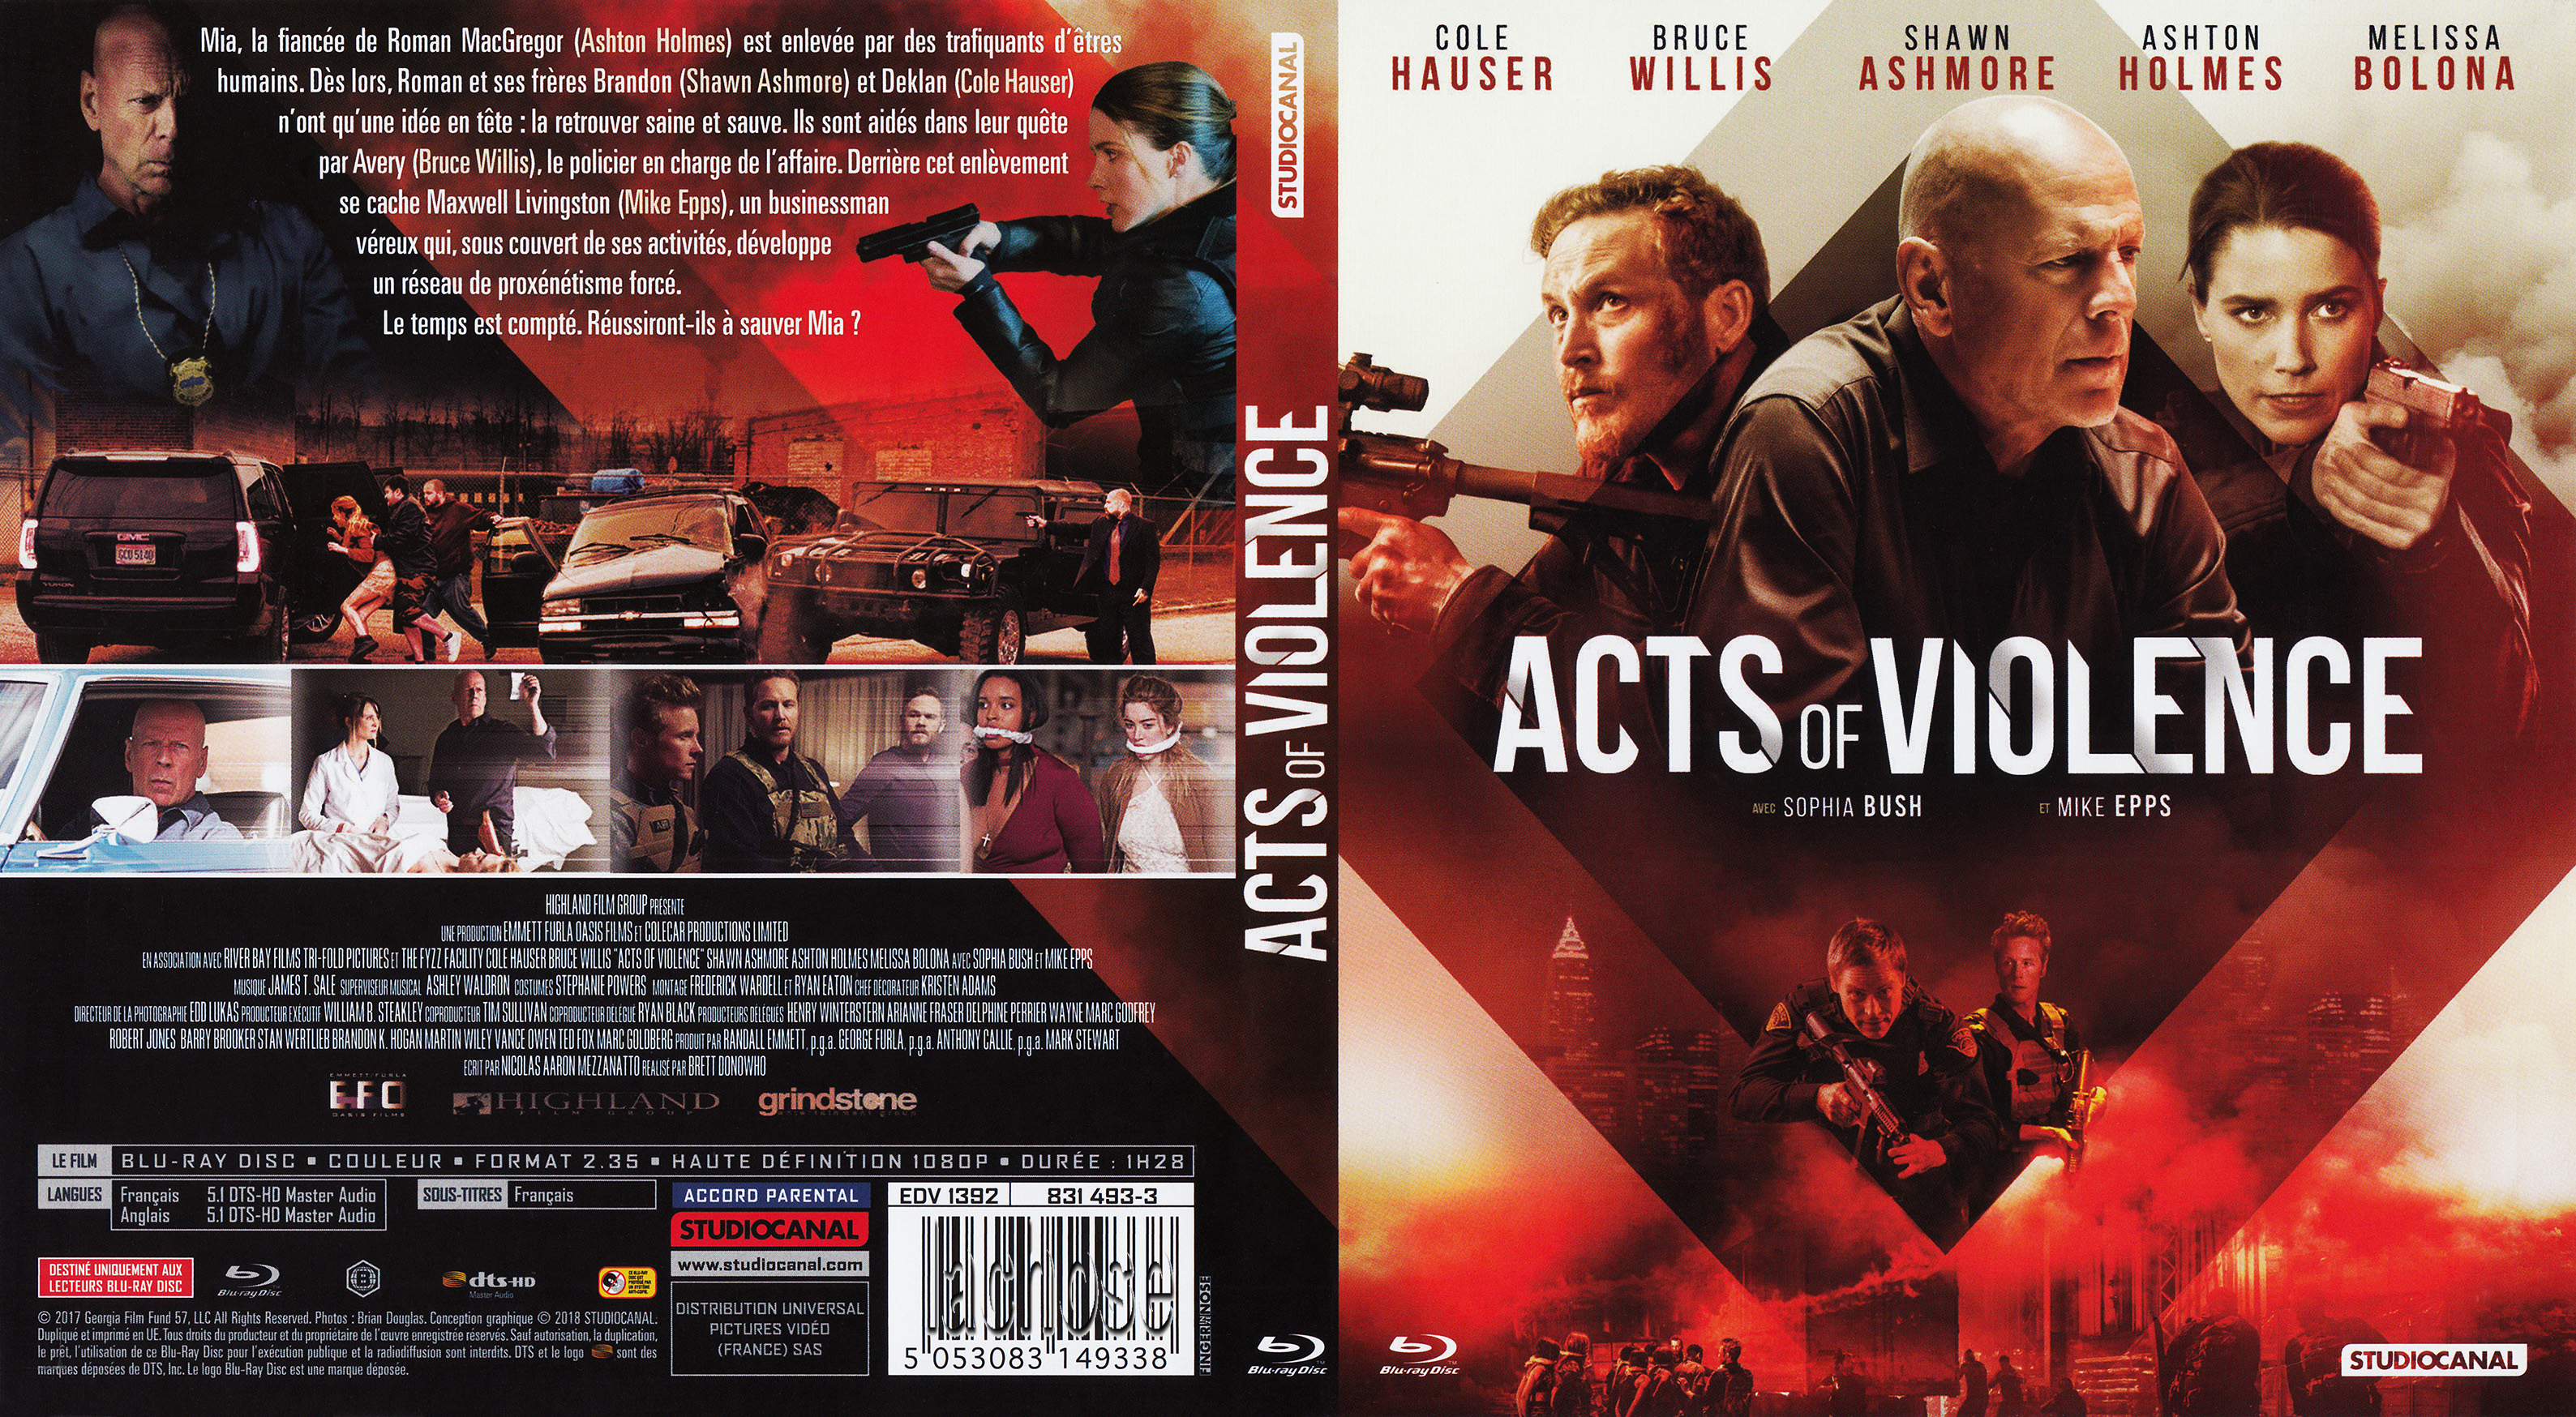 Jaquette DVD Acts of violence (BLU-RAY)